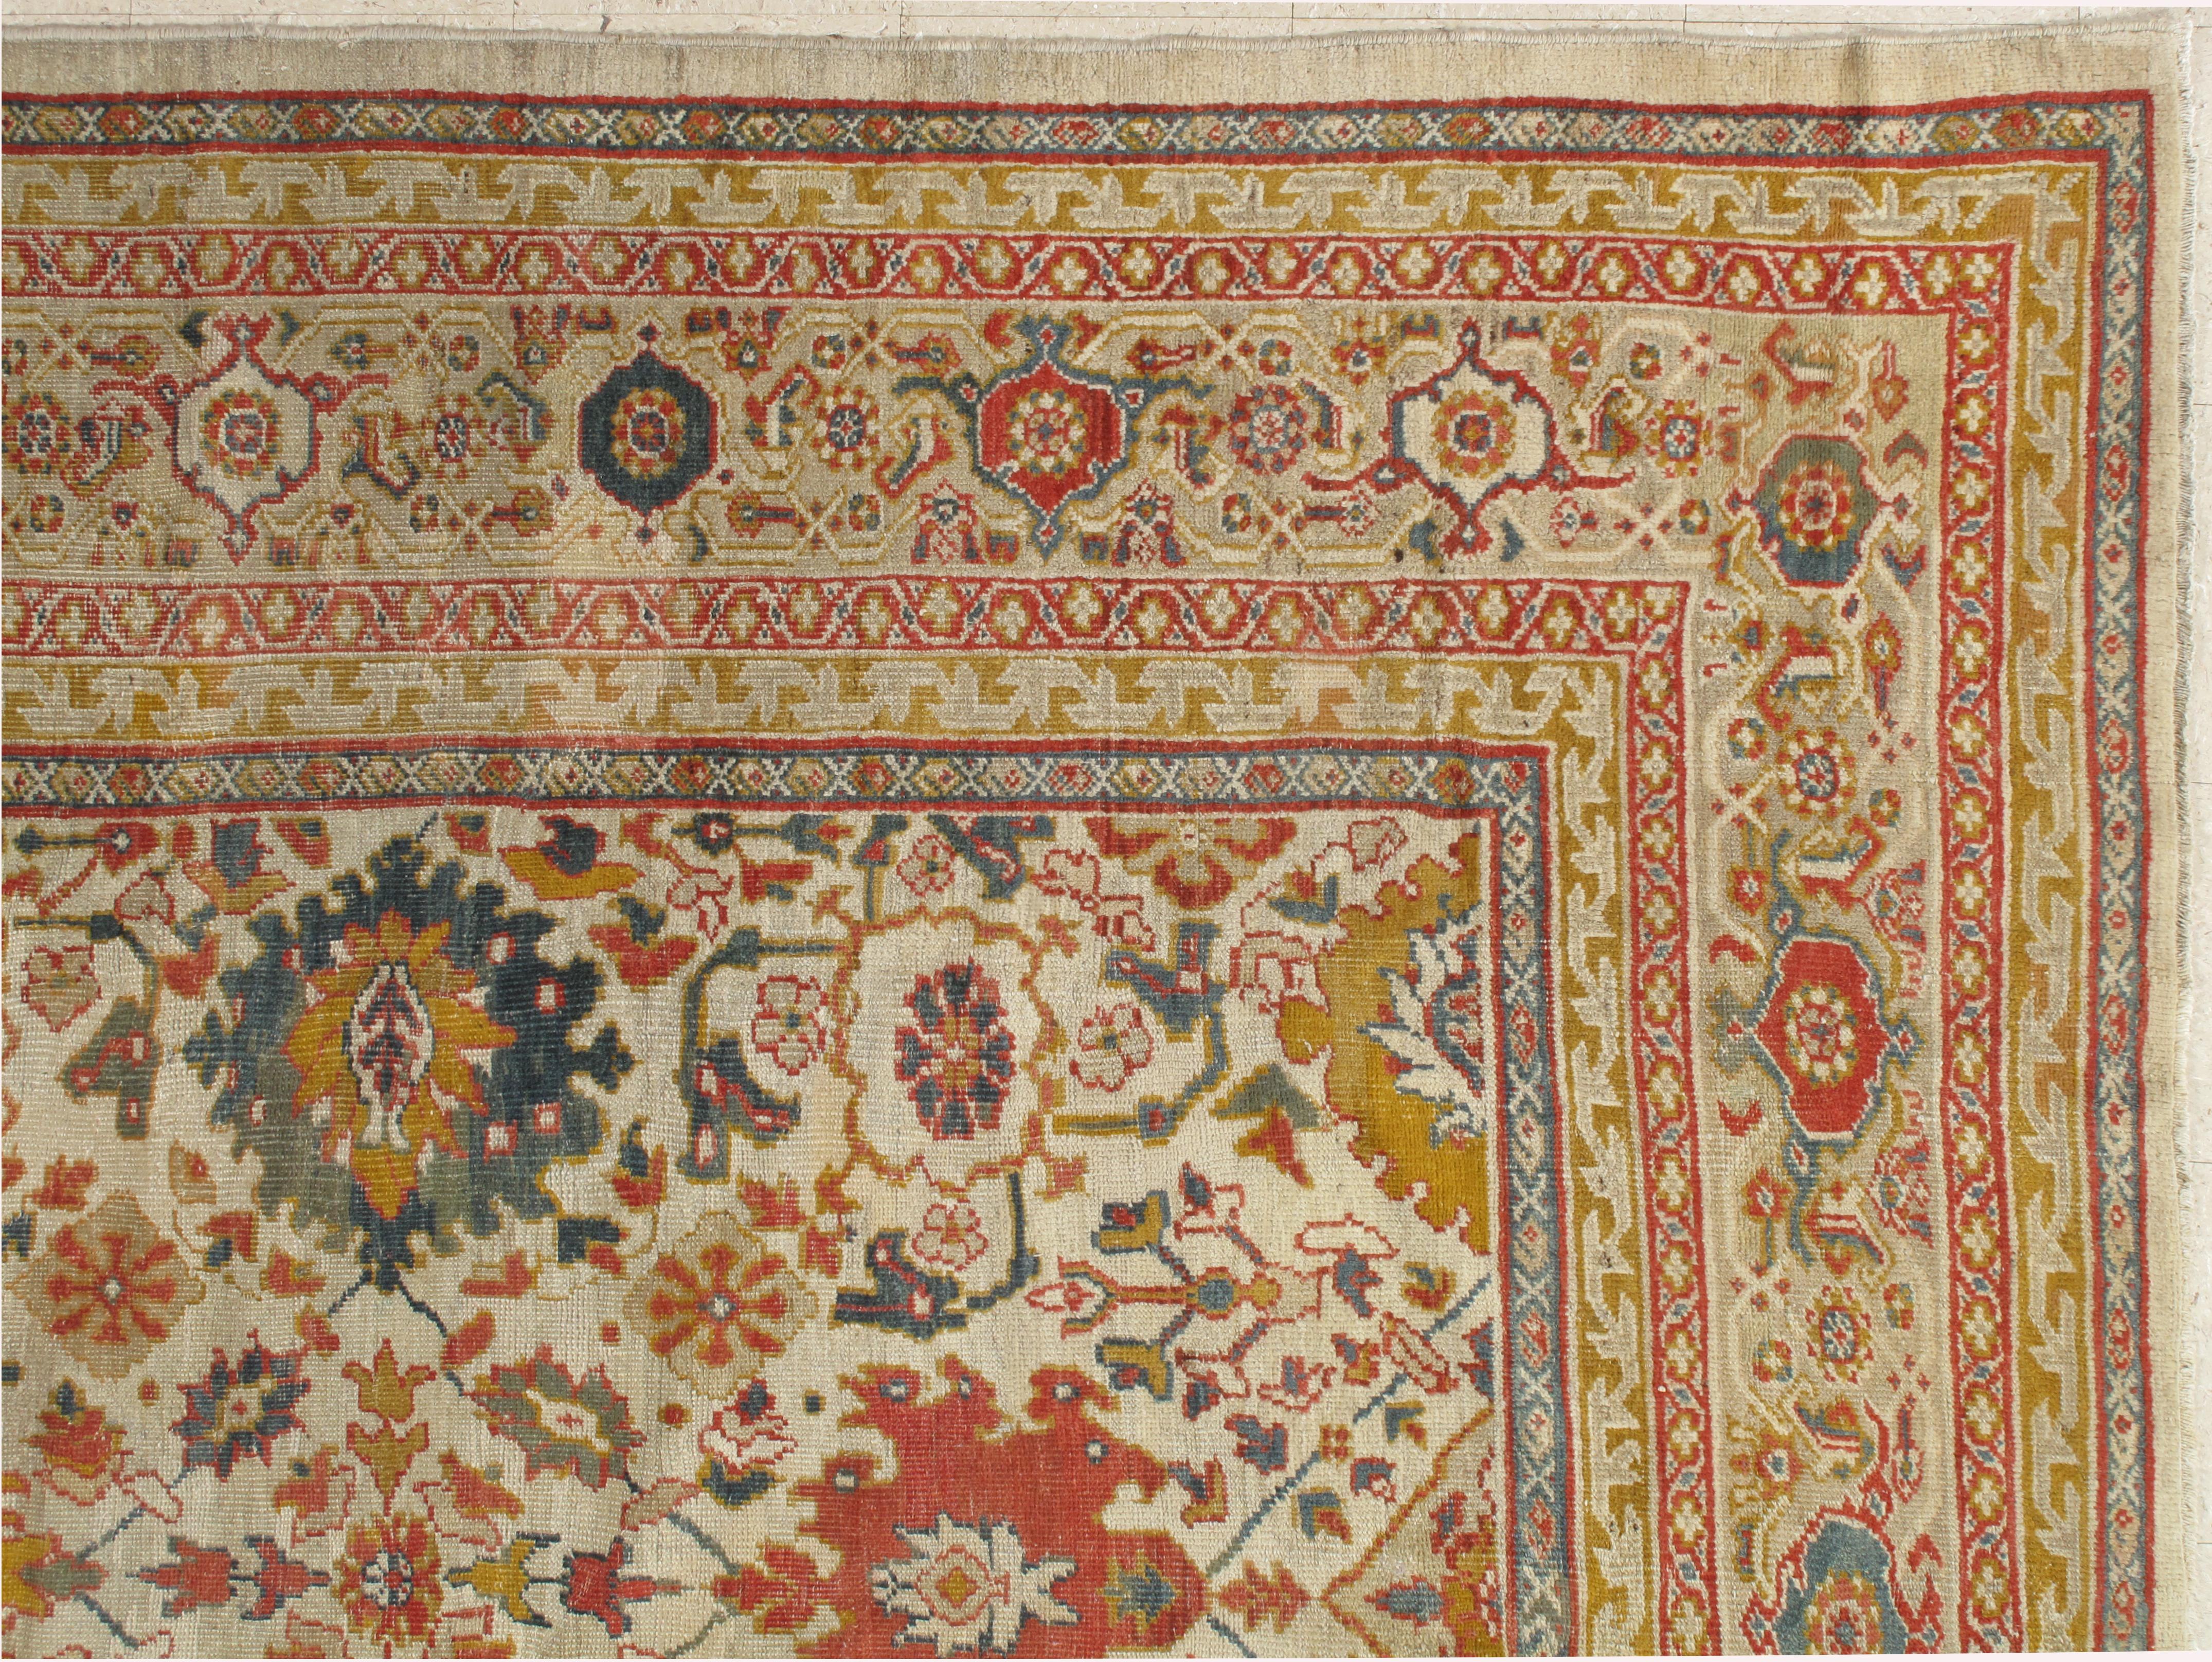 Sultanabad is a region in NW, Persia. It was the site of the principle Ziegler weavings in the late 19th century. Sultanabad's are famous for their floral designs as they improved the quality and designs to match the European taste. Adapting the